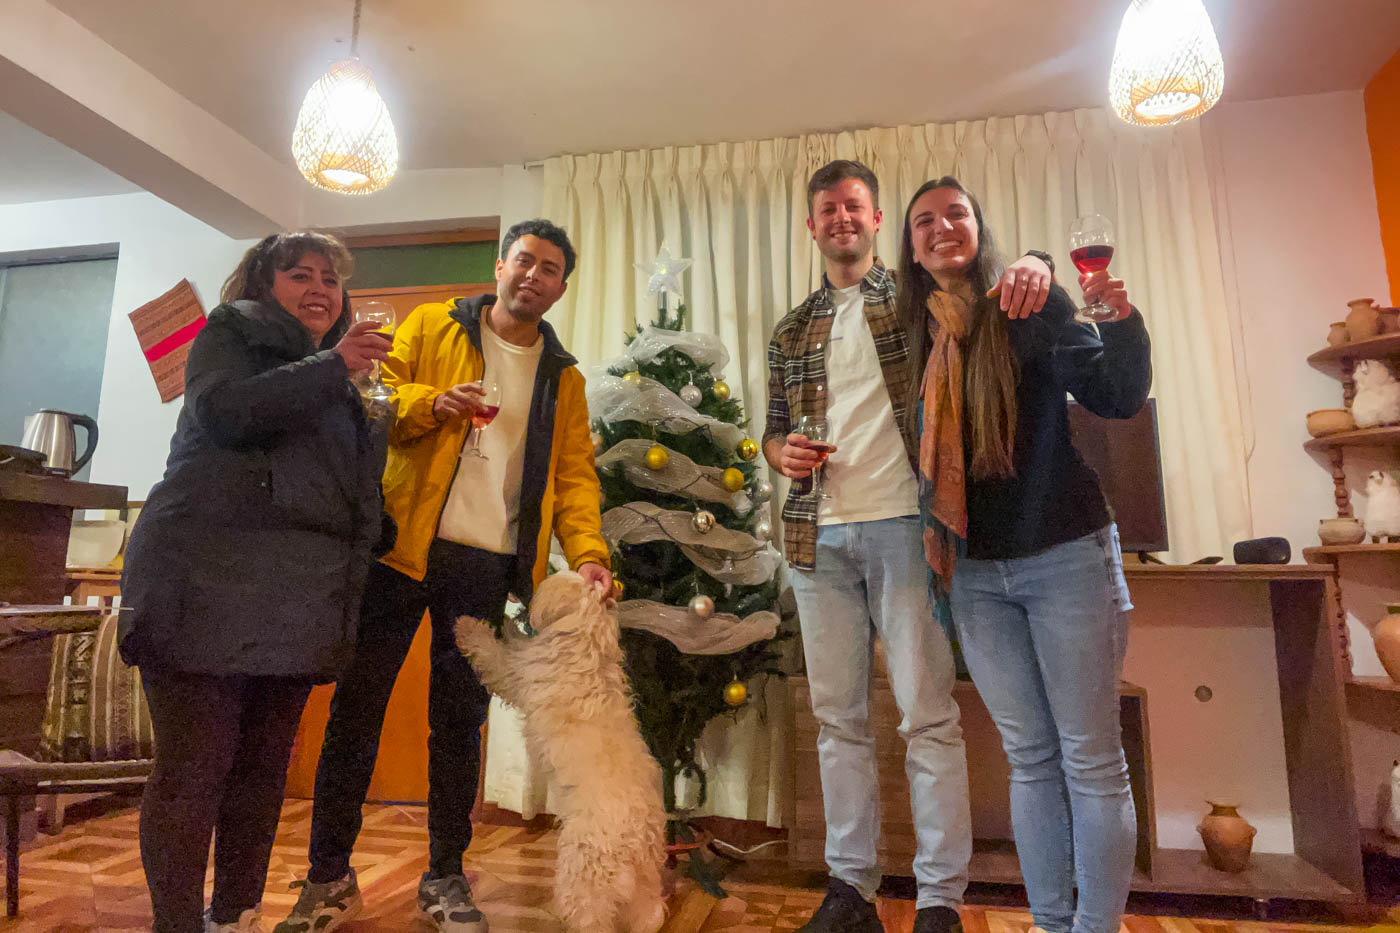 Ryan and Sara posing with Fabricio and his mum with Molly the dog on Christmas Eve in Cusco.